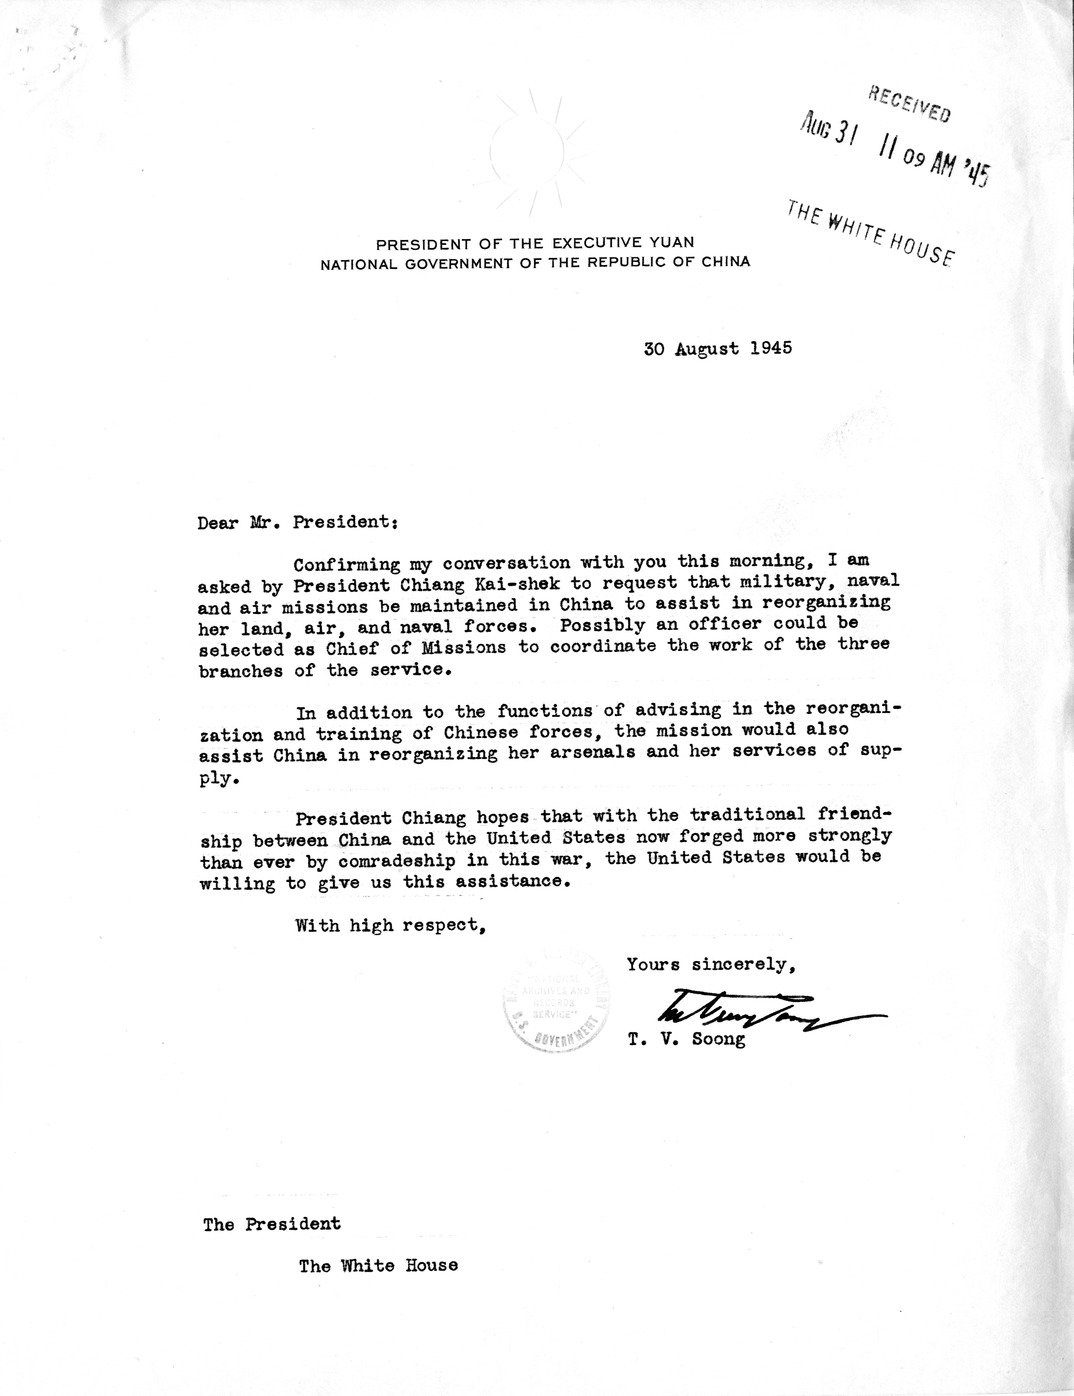 Correspondence from T.V. Soong to President Harry S. Truman